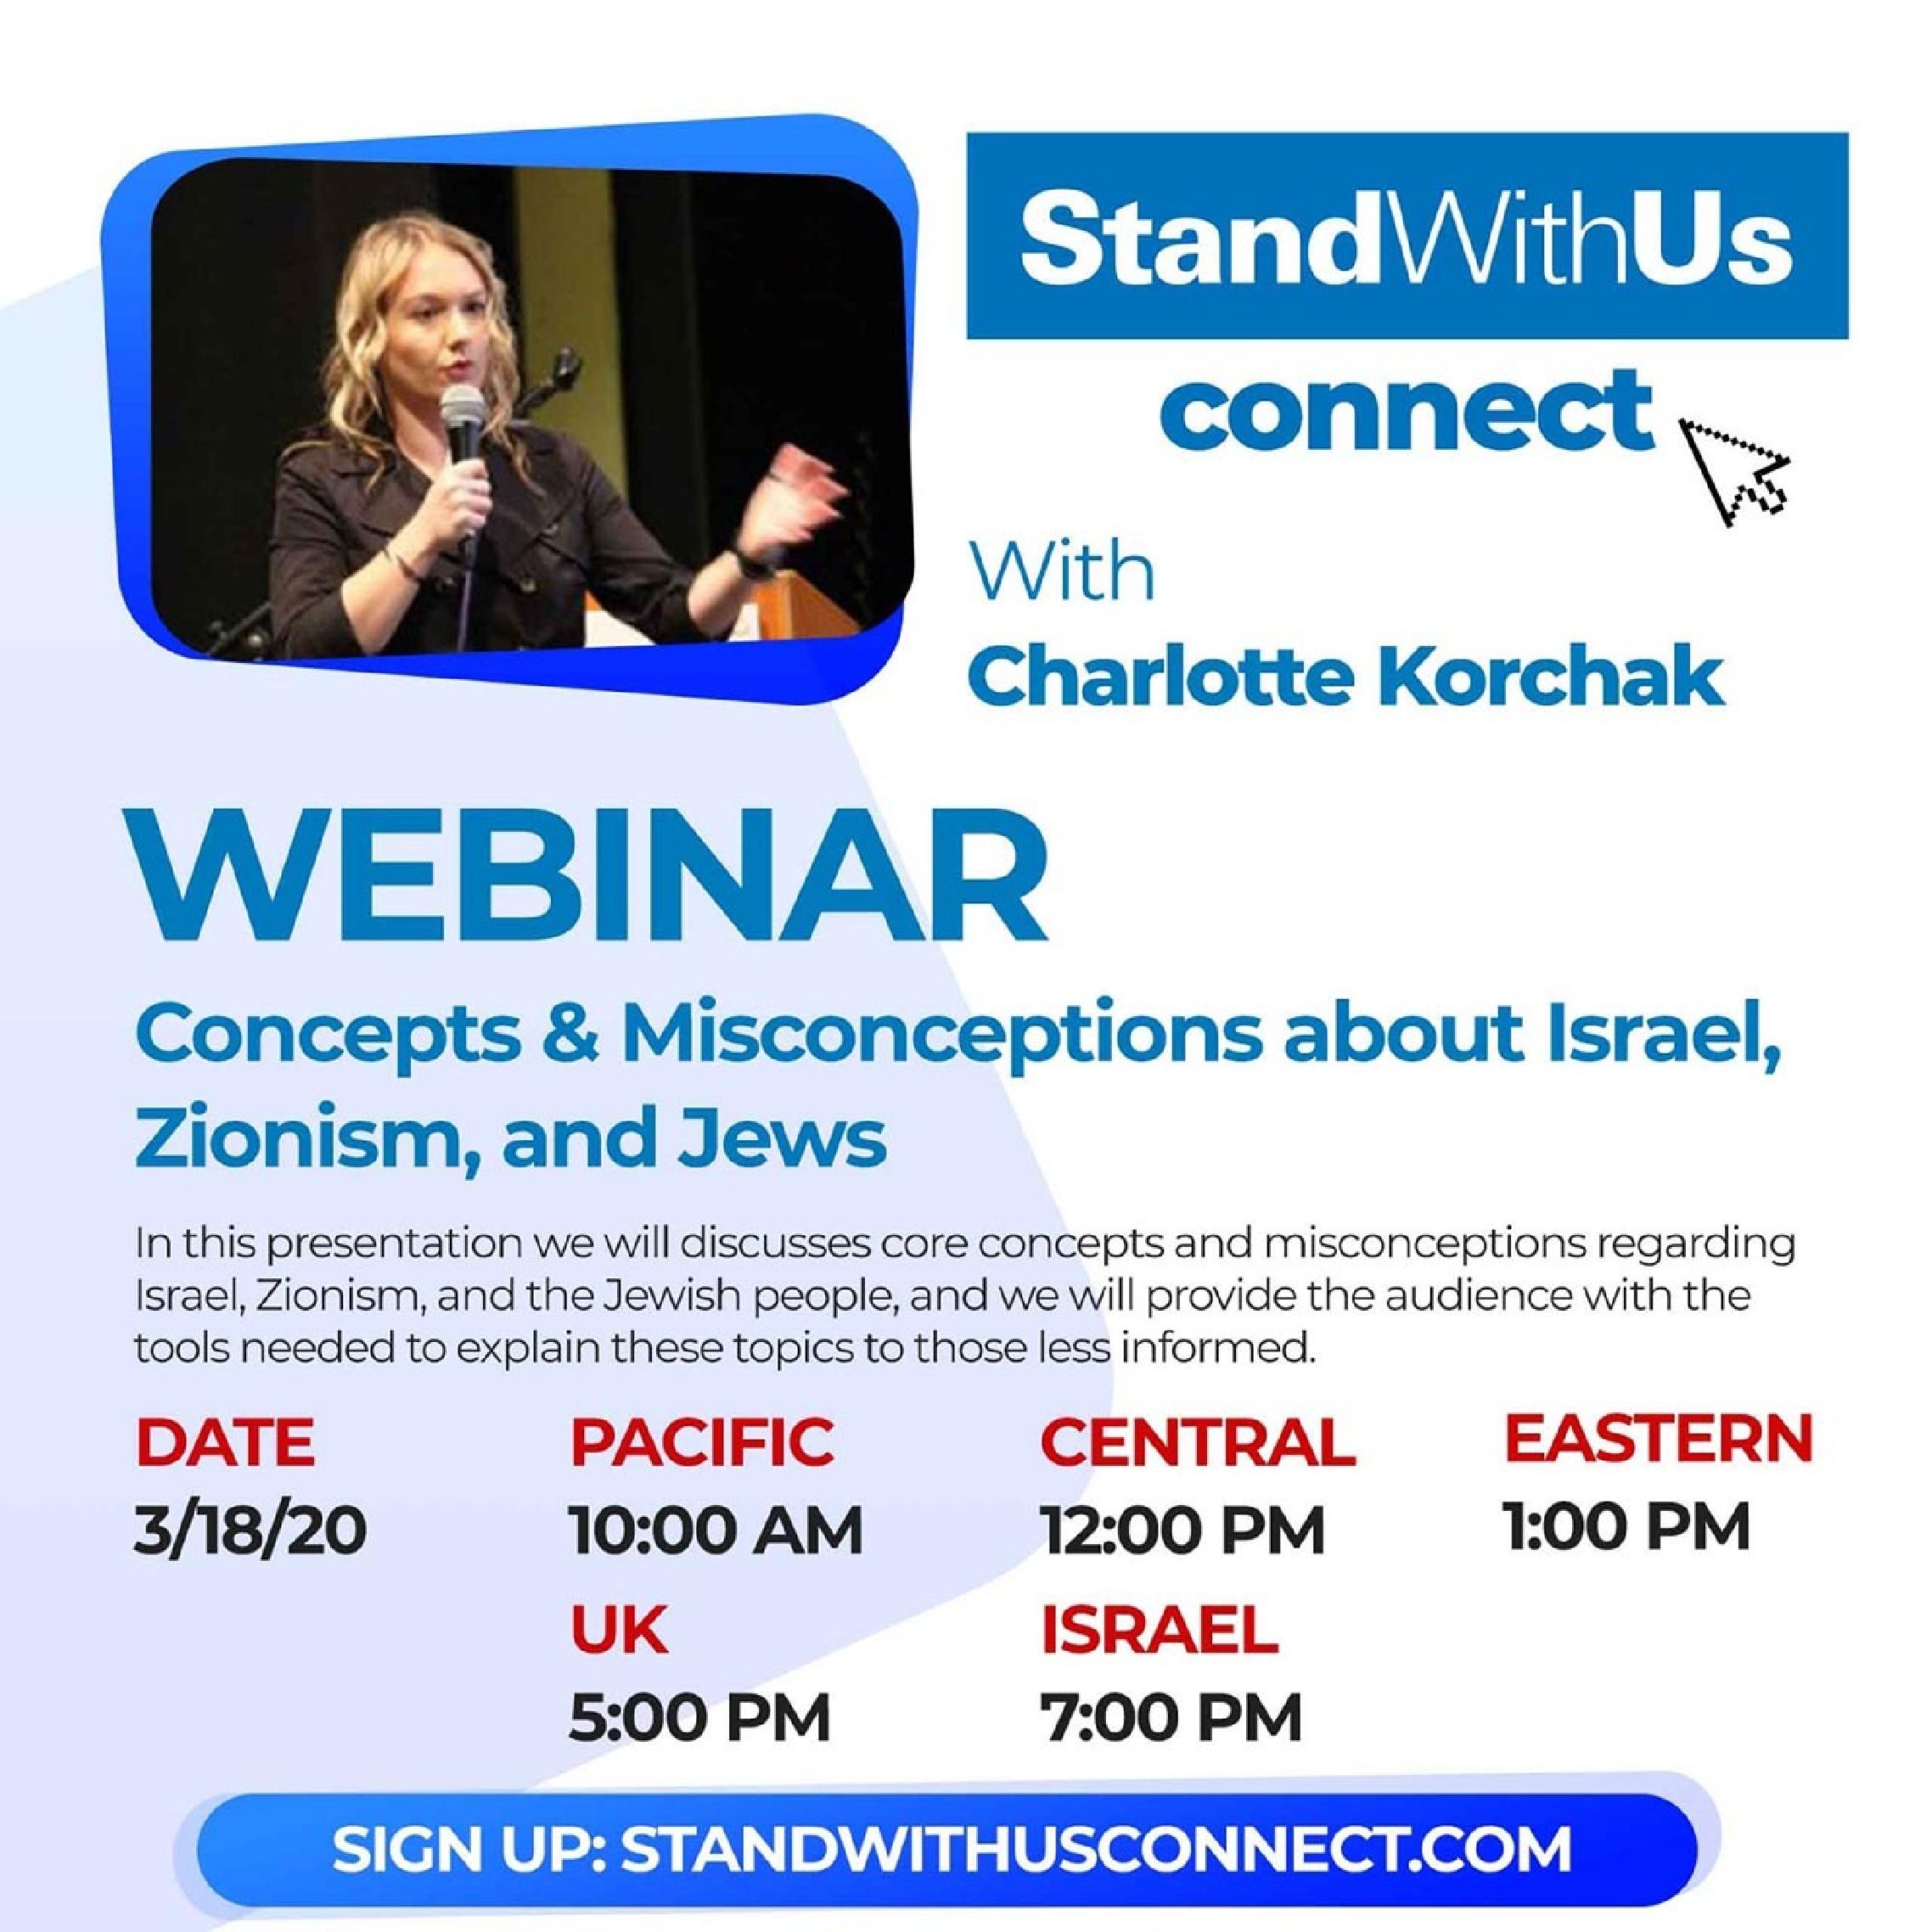 Join StandWithUs Connect Live from Israel